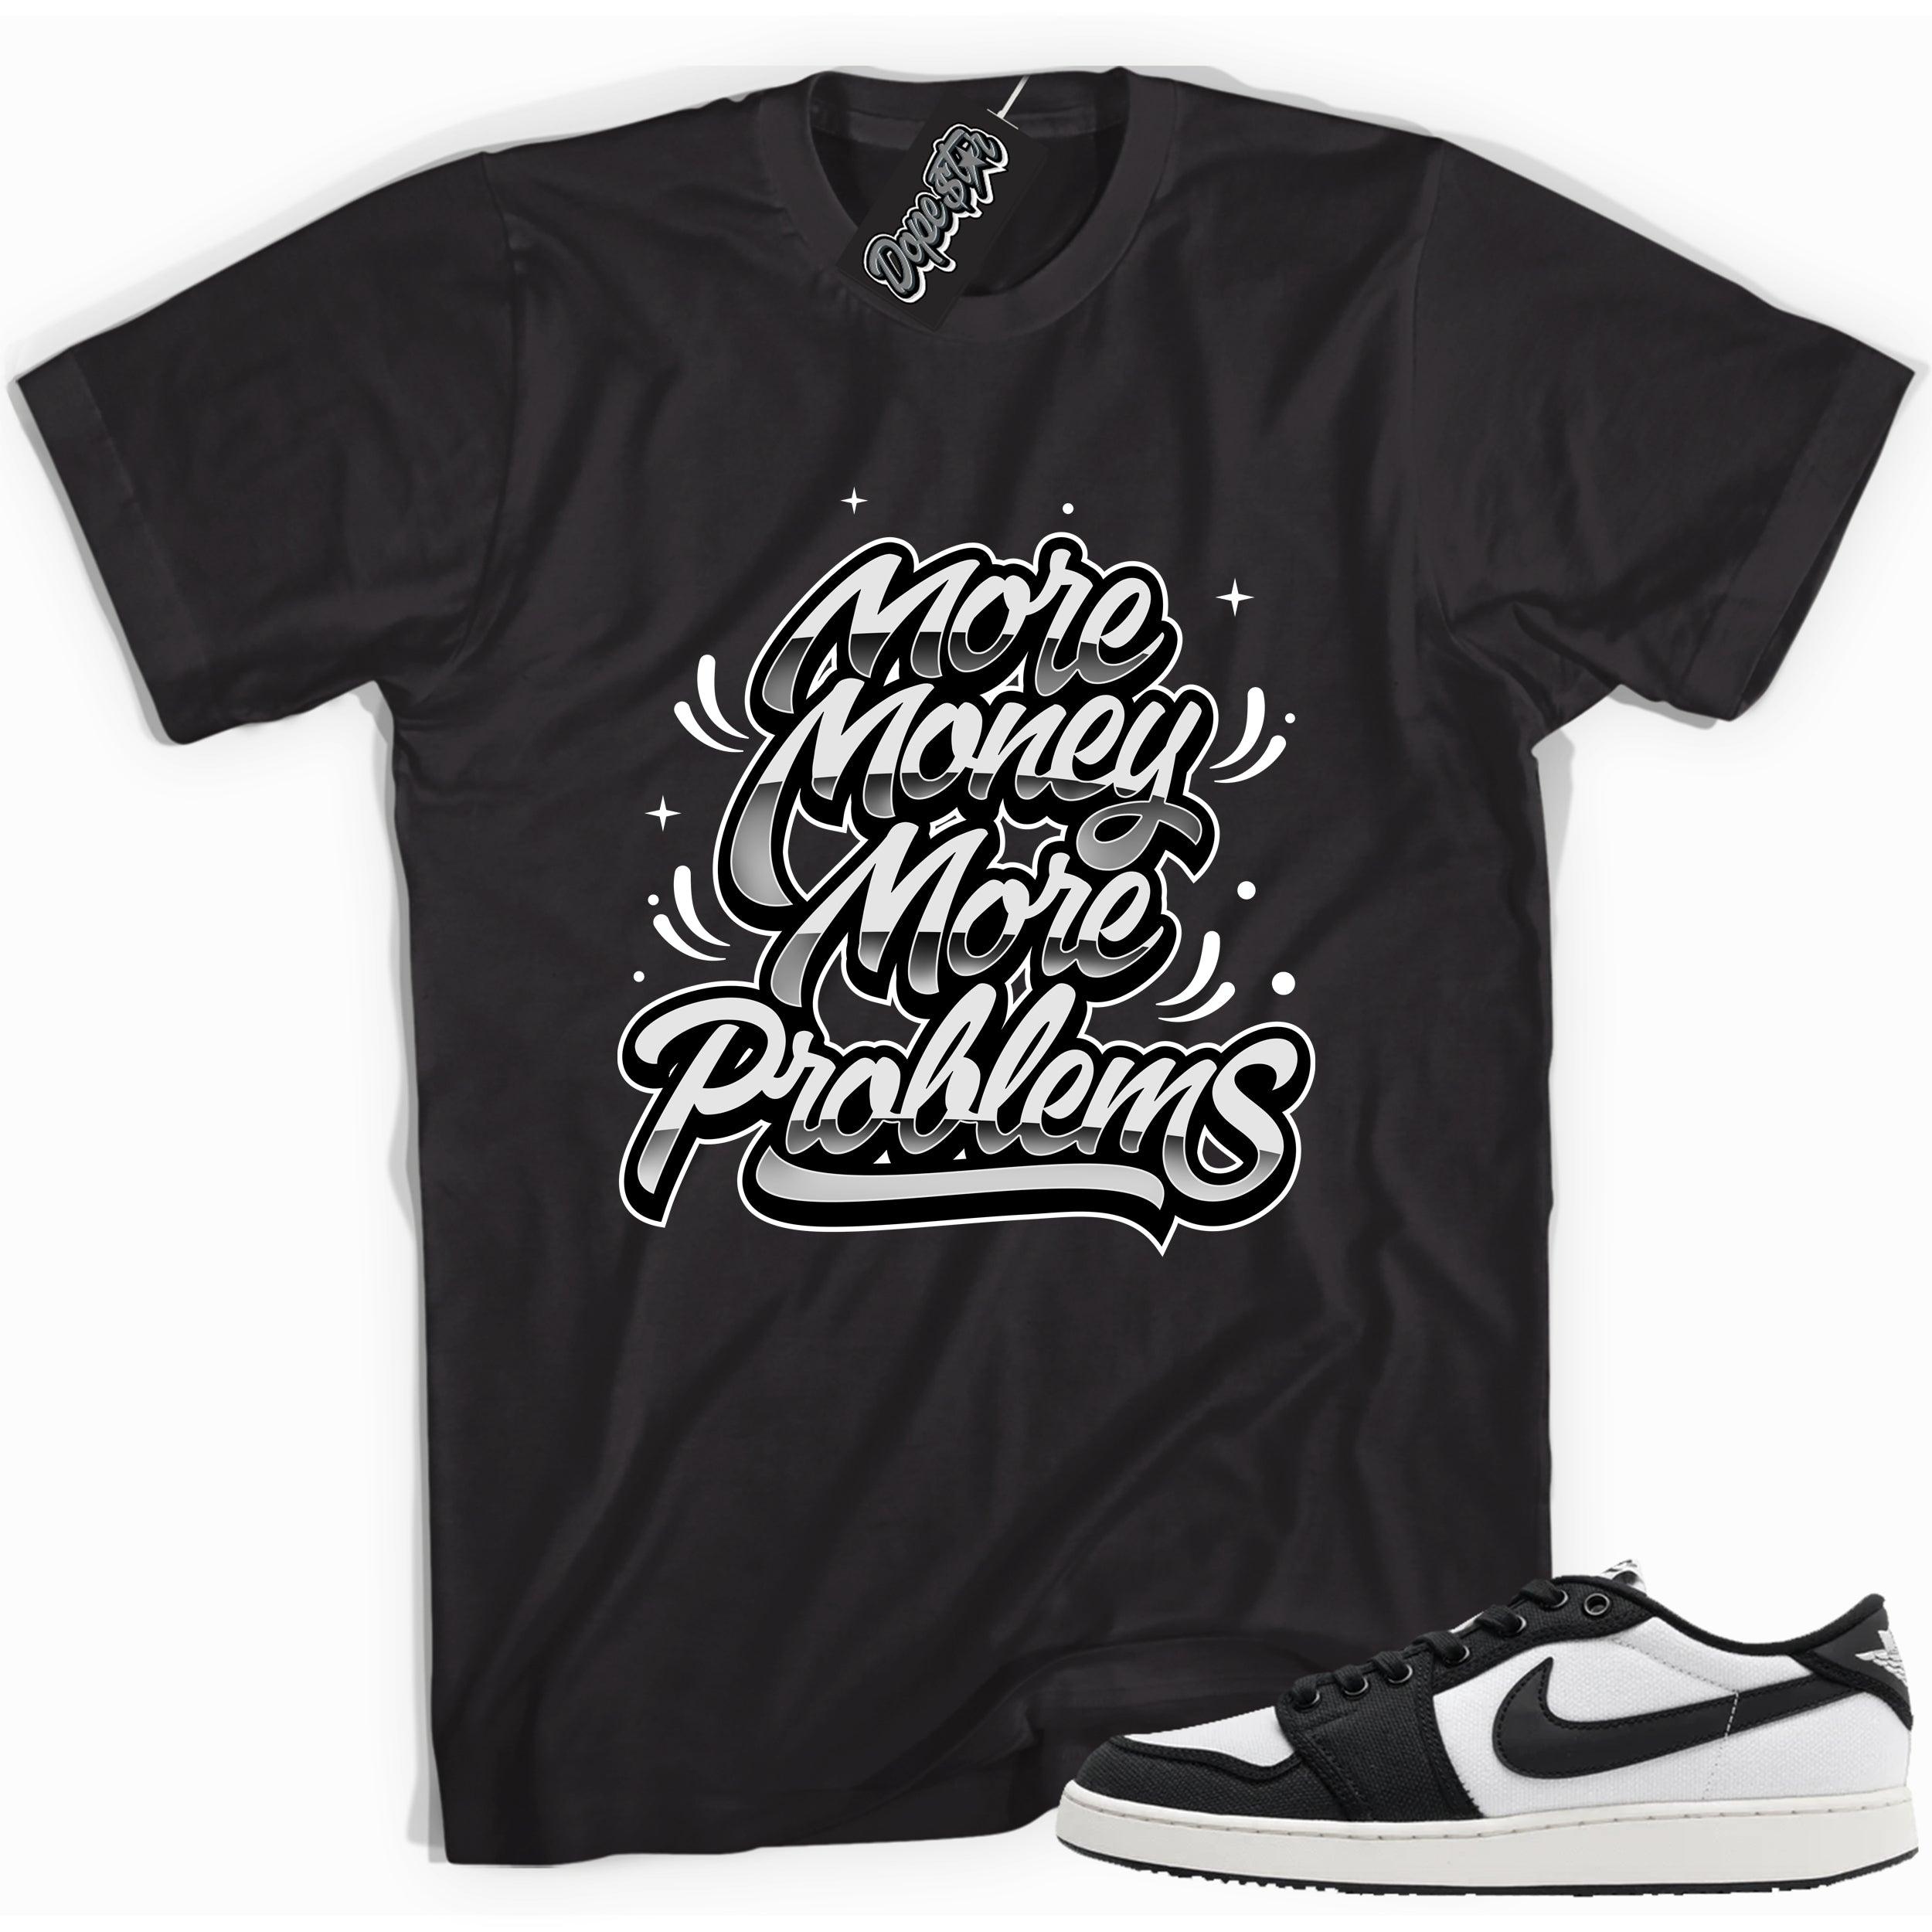 Cool black graphic tee with 'more money more problems' print, that perfectly matches Air Jordan 1 Retro Ajko Low Black & White sneakers.